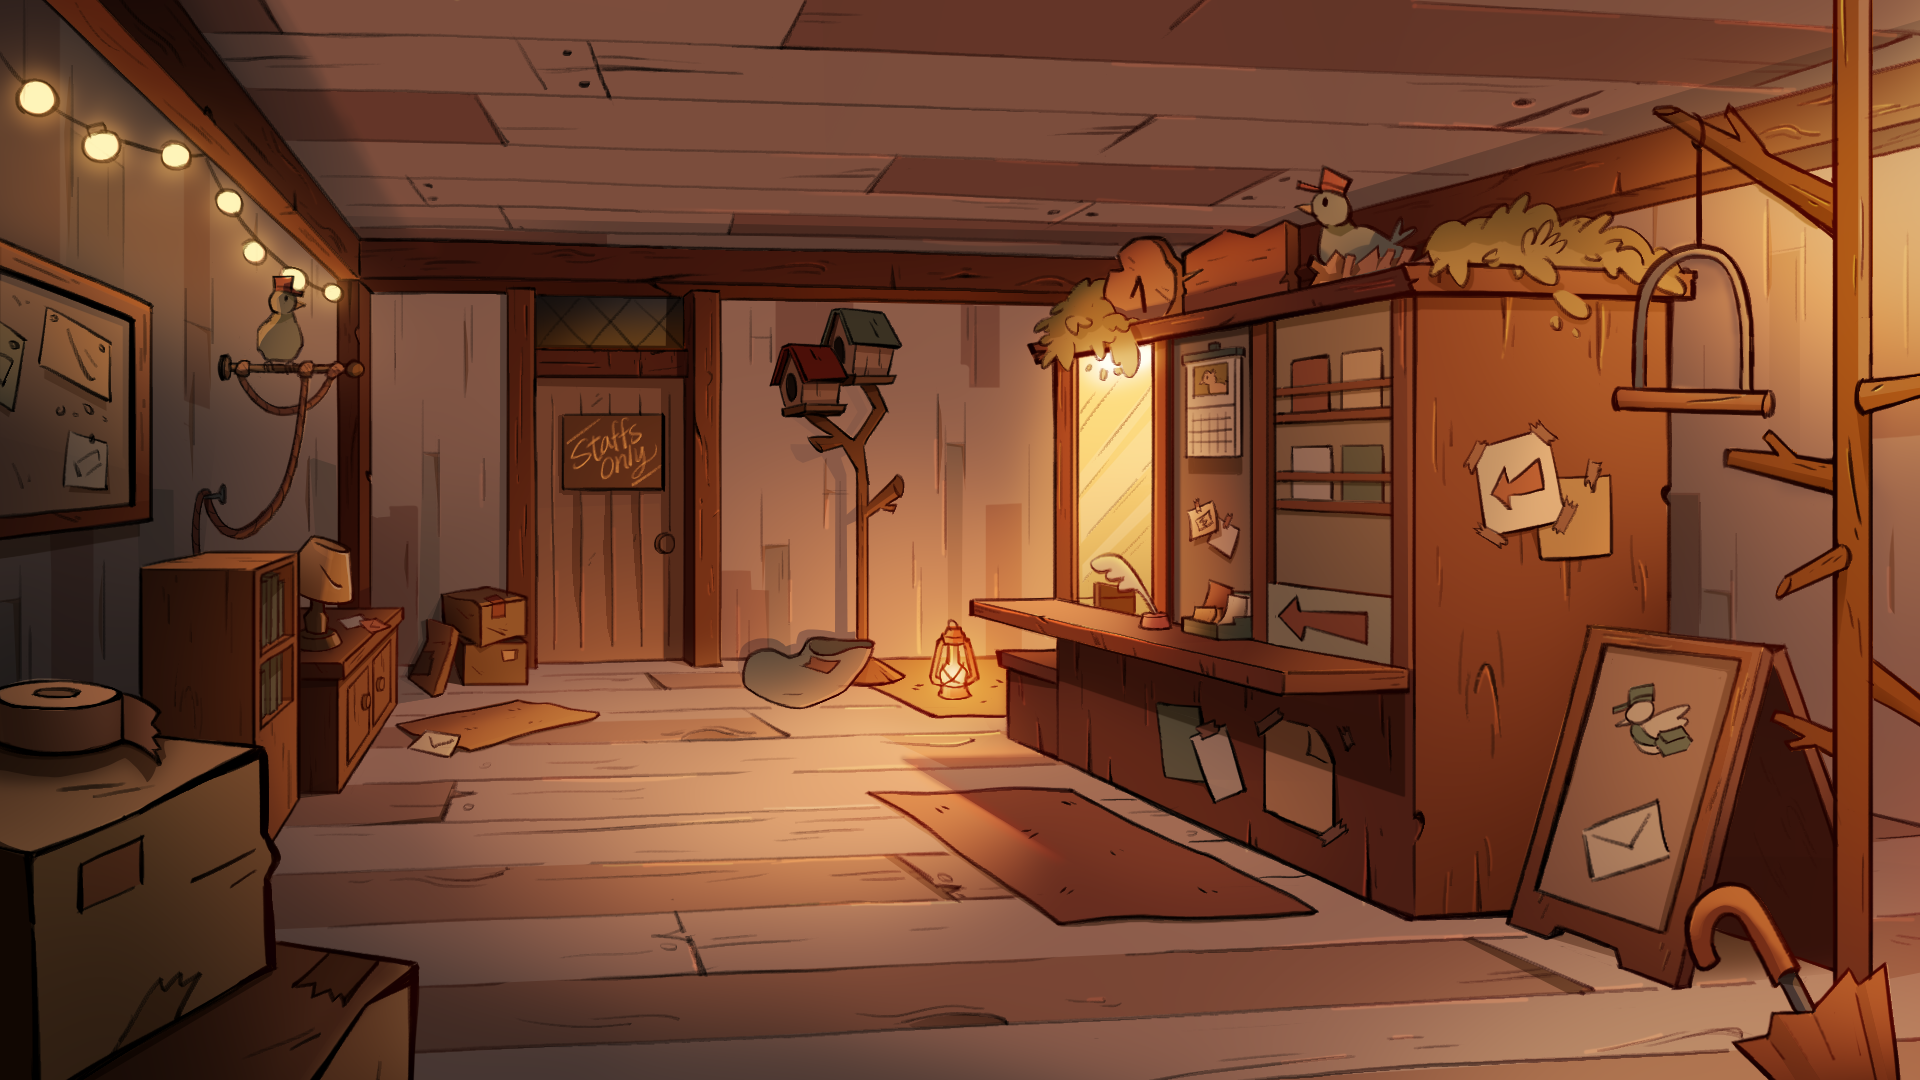 Gravity Falls post office view 2 (Final colour).png